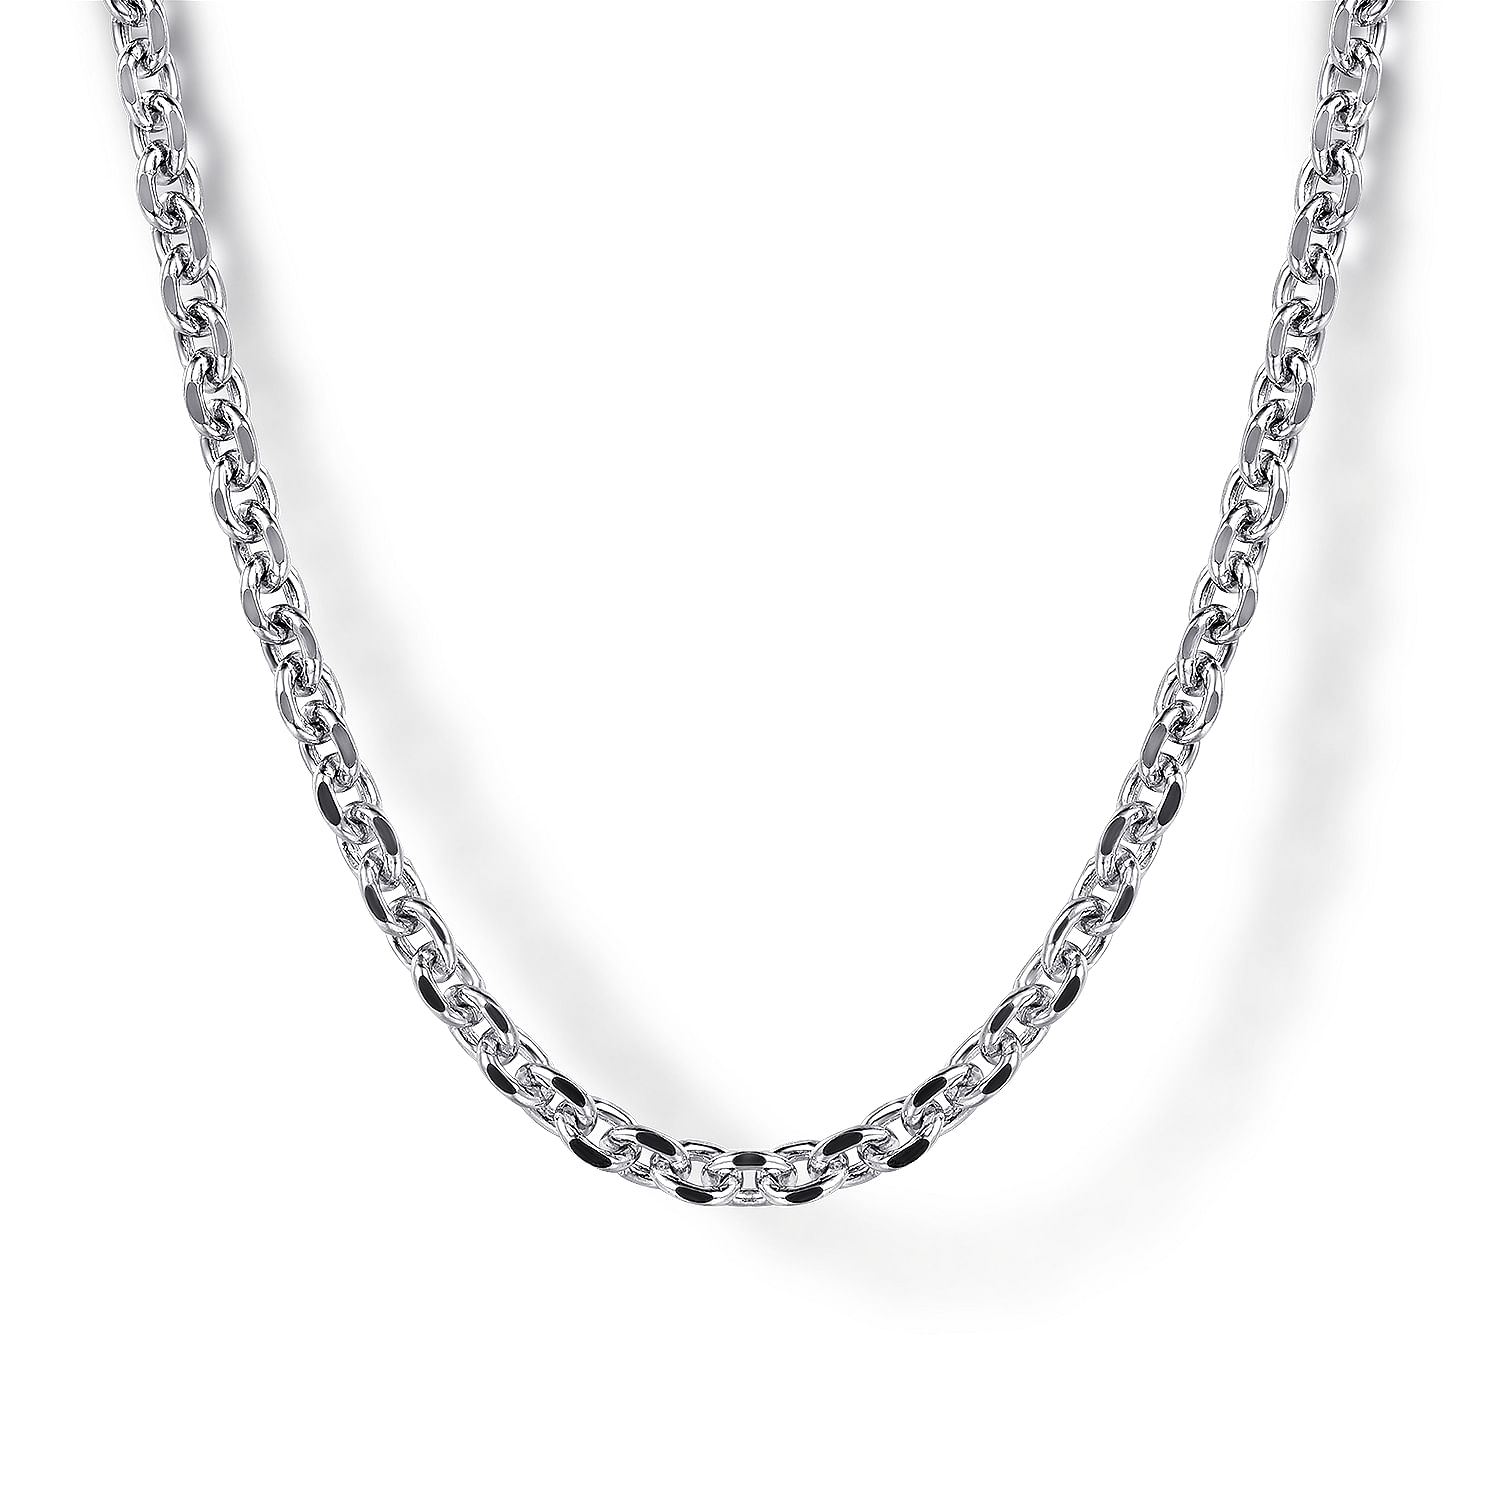 22 Inch 925 Sterling Silver Men's Link Chain Necklace | Shop 925